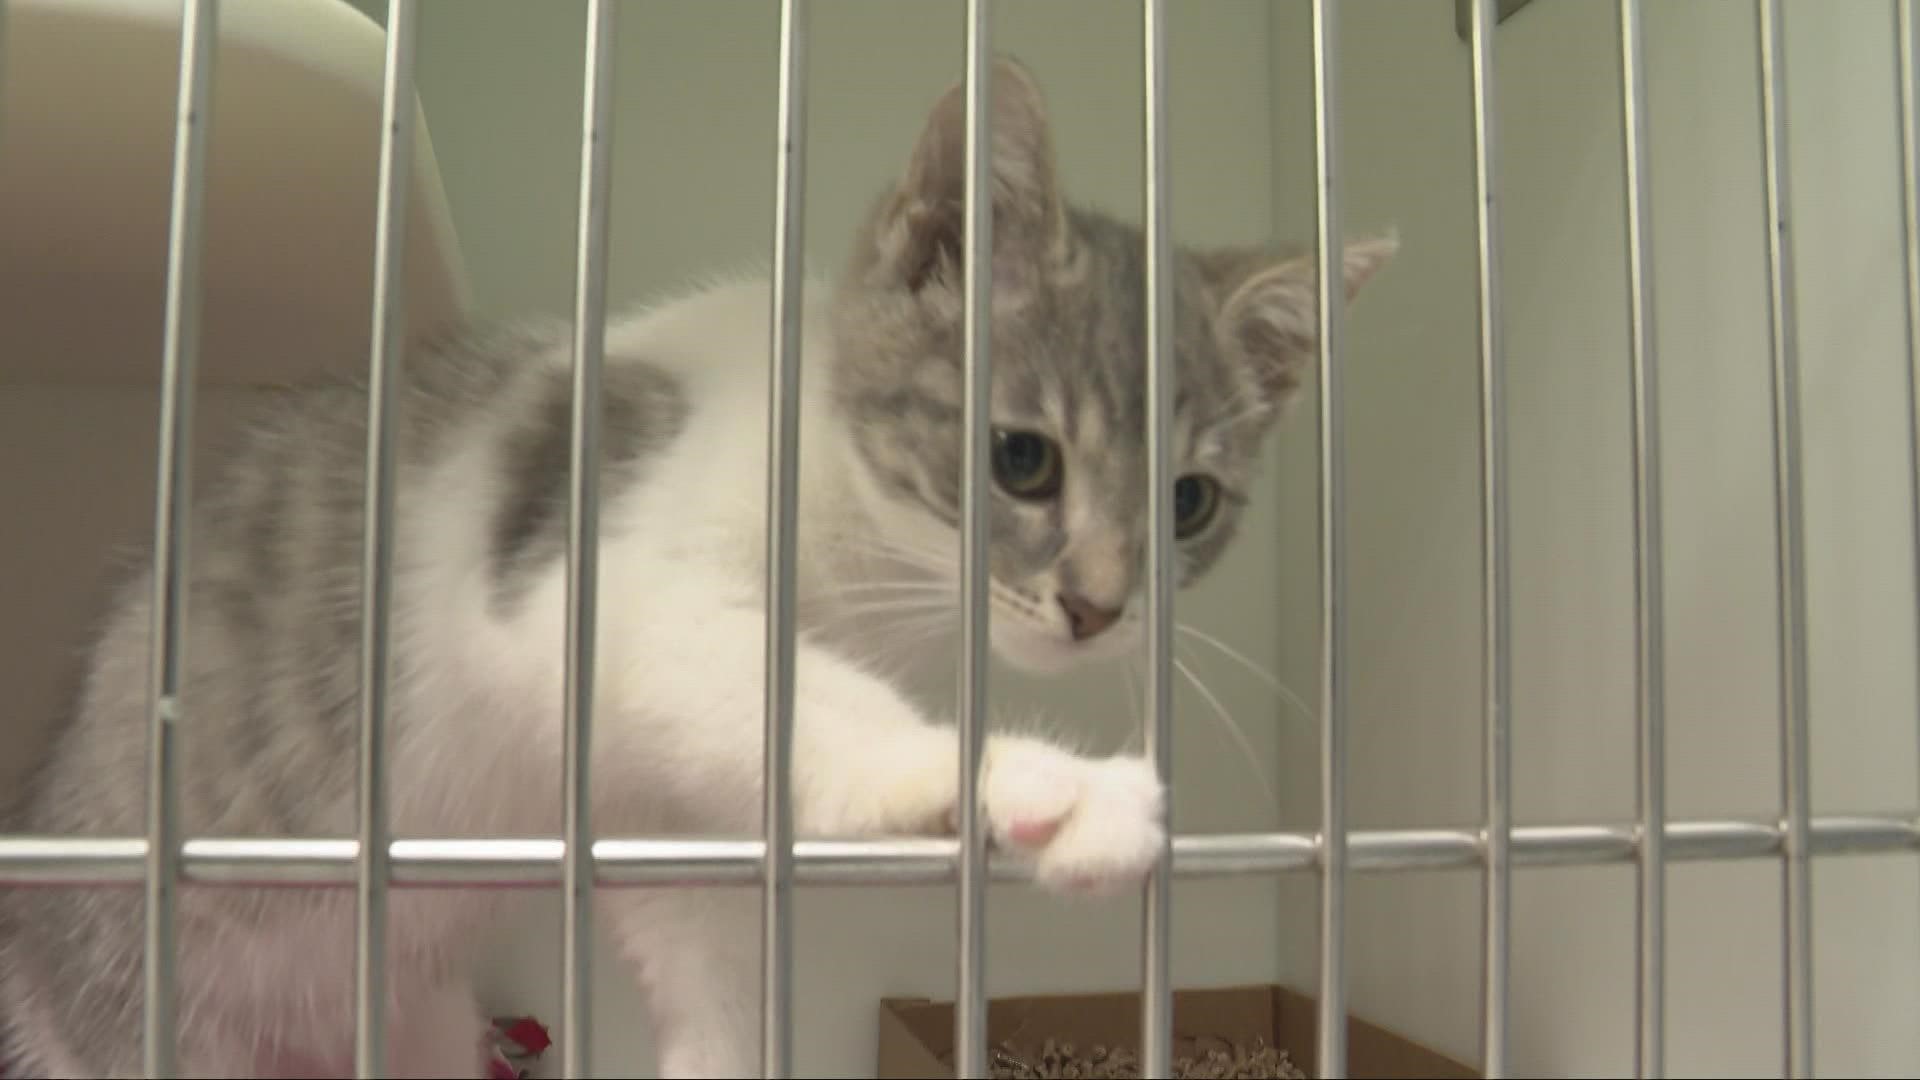 Local animal shelters are taking in more pets in need of homes than people looking to adopt them, leaving the shelters overcrowded. 3News' Isabel Lawrence reports.